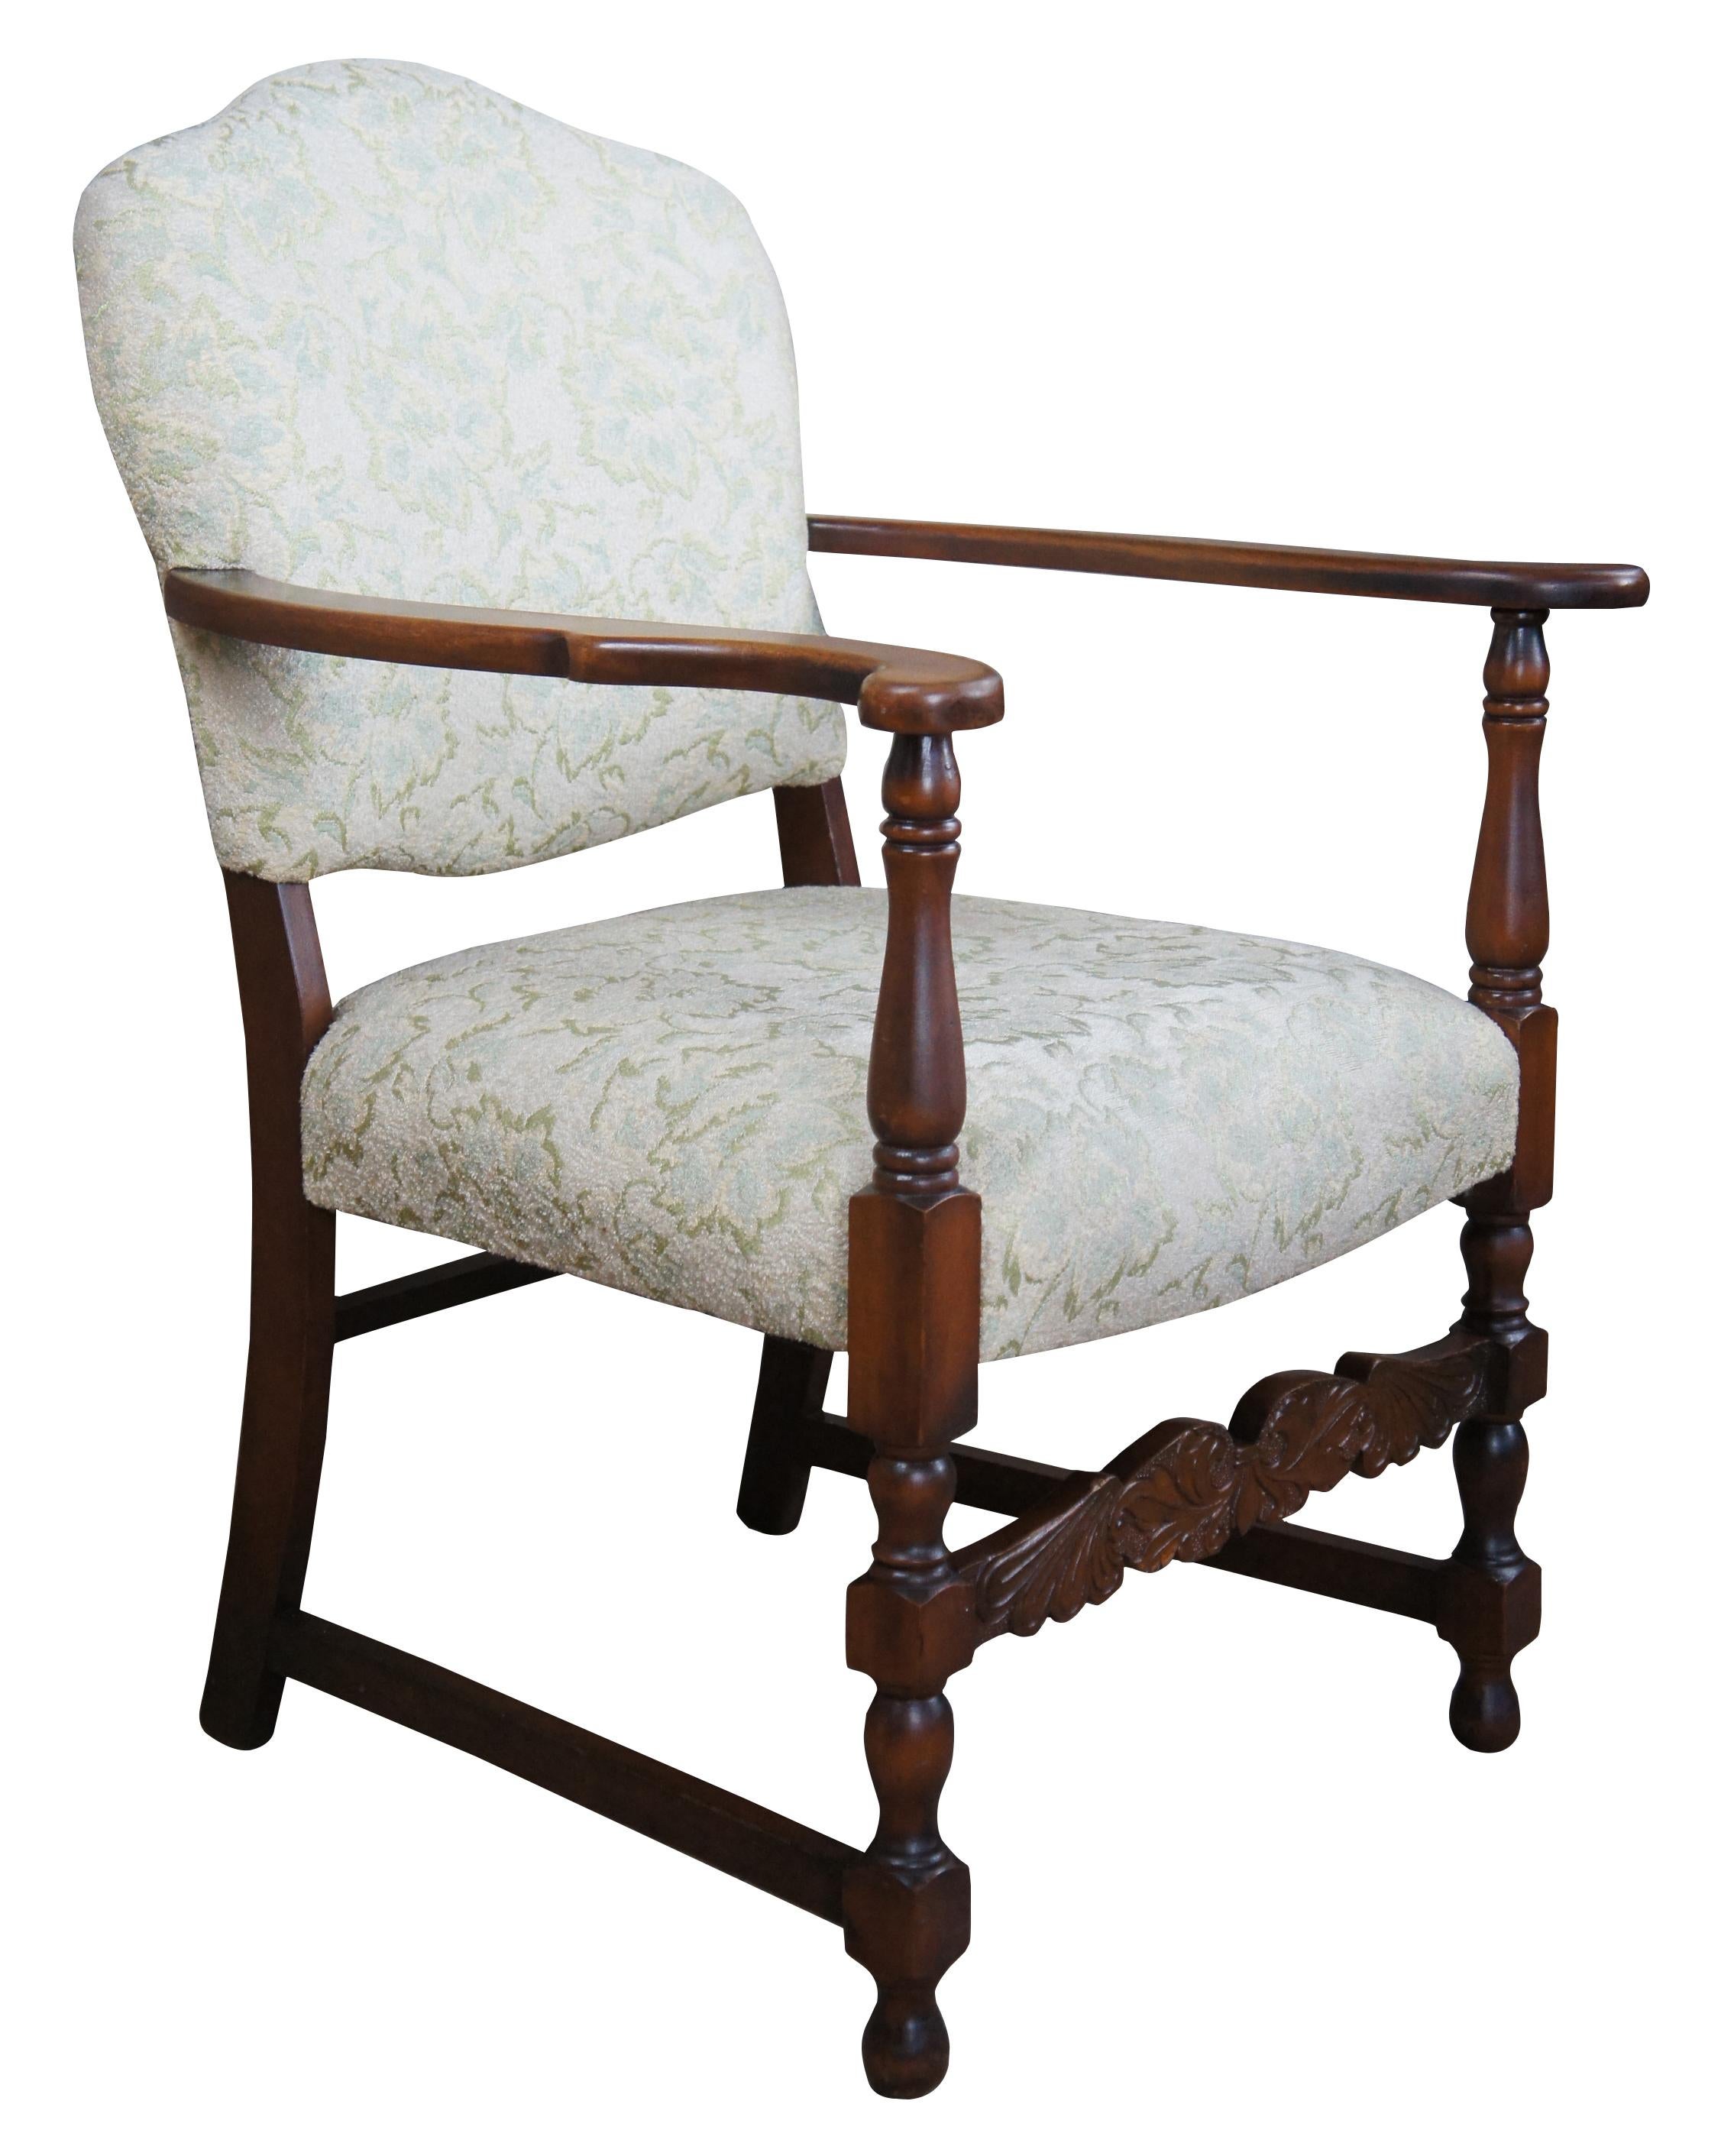 Mid 20th century Spanish revival arm chair. Made from mahogany with flared arms, turned supports and a carved fluer stretcher. The chair is upholstered along the seat and back with a floral pattern.